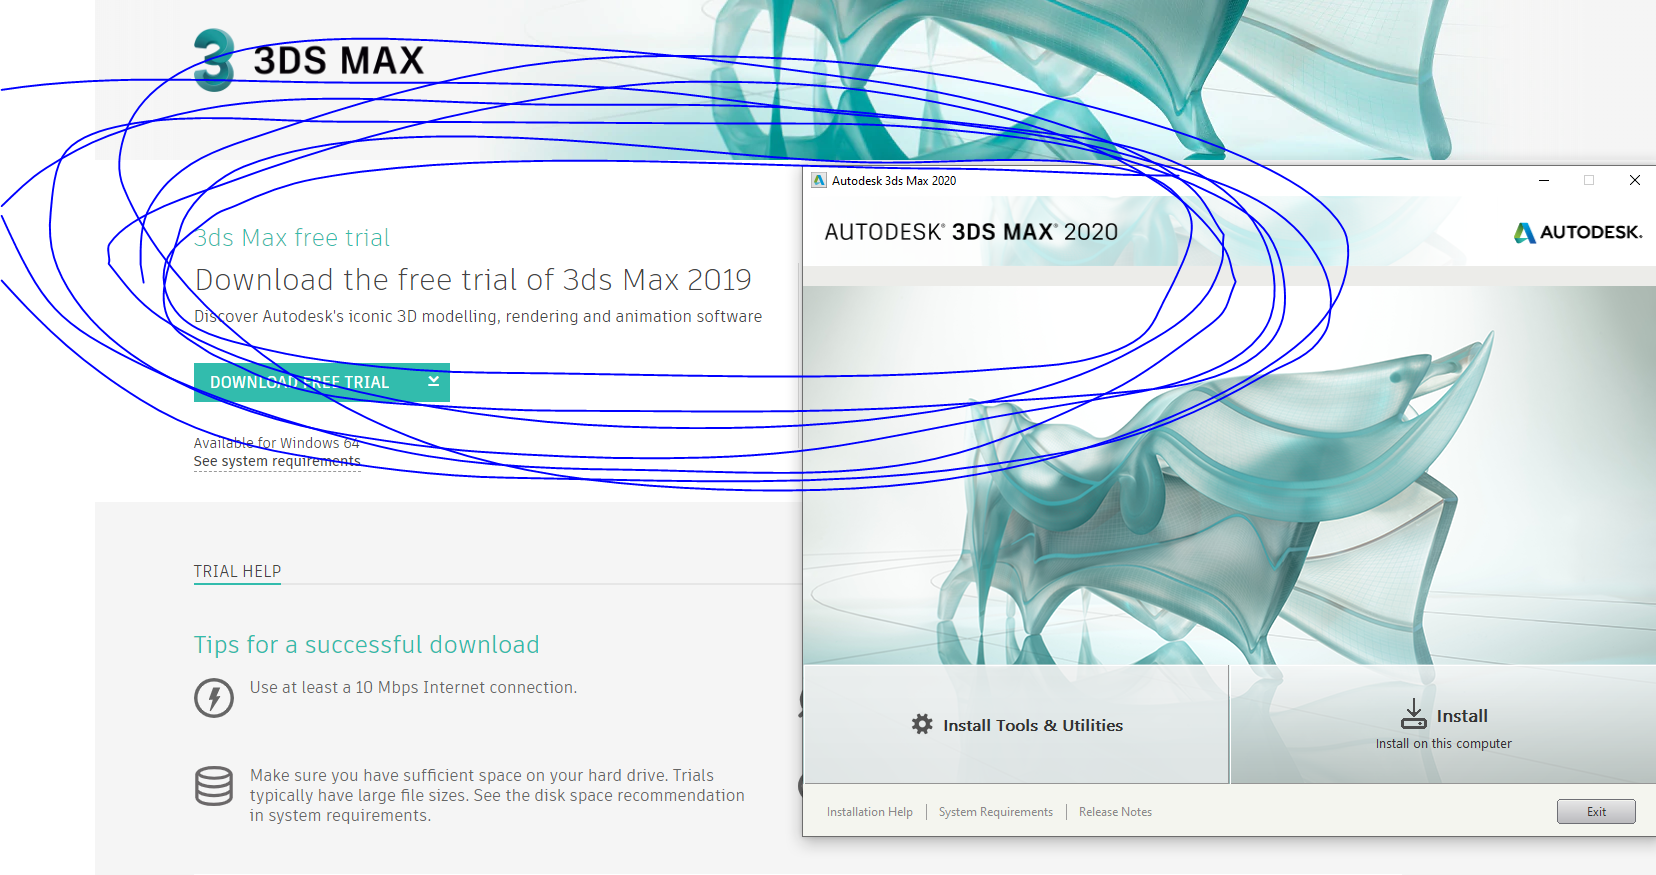 Downloading Max trial 2019 downloads 2020 instead - Autodesk Community